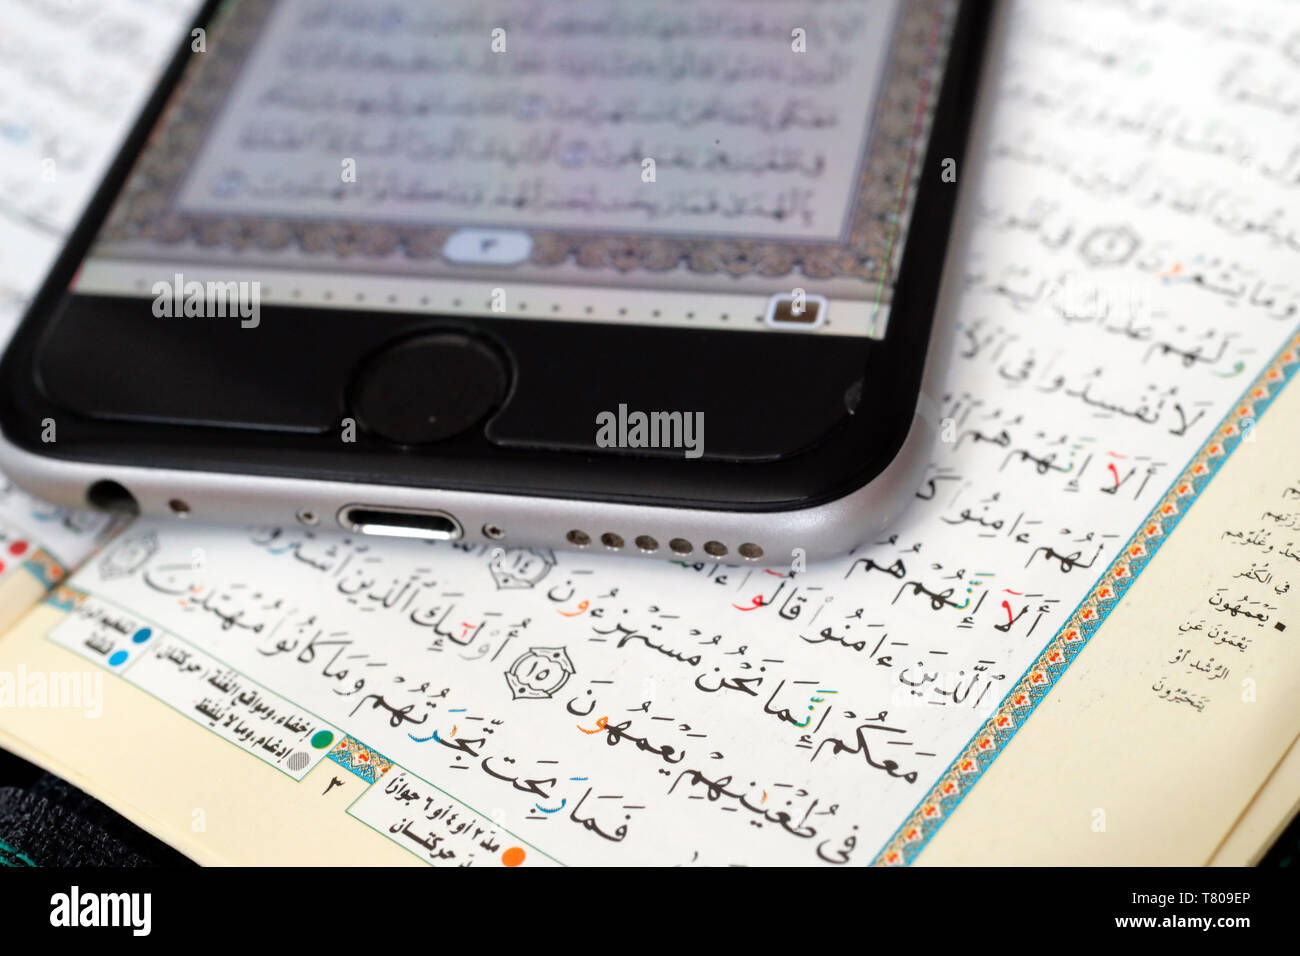 Digital Quran on a smartphone and Holy Quran book, Vietnam, Indochina, Southeast Asia, Asia Stock Photo